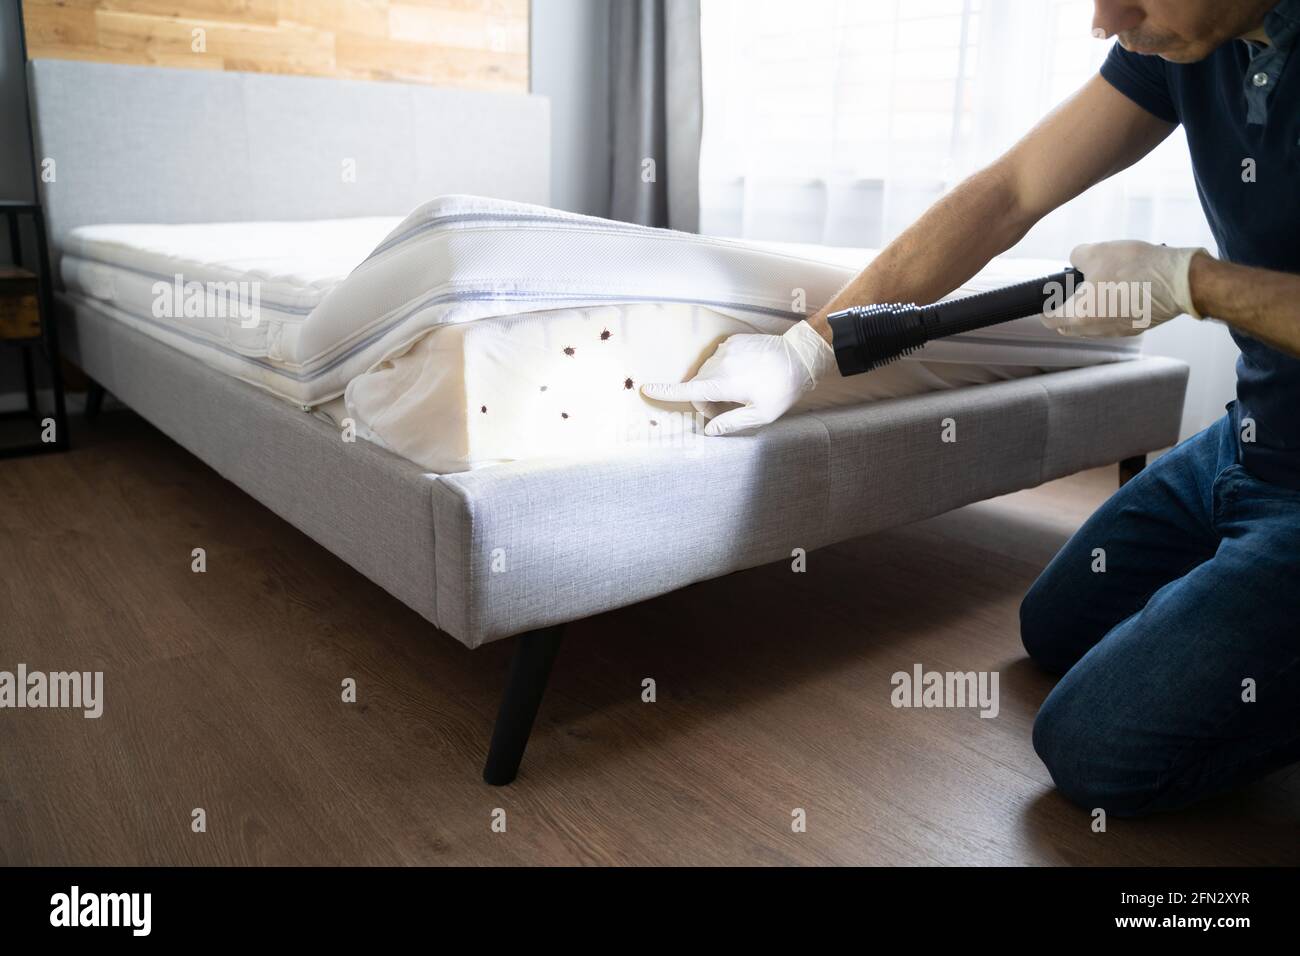 Bed Bug Infestation And Treatment Service. Bugs Extermination Stock Photo